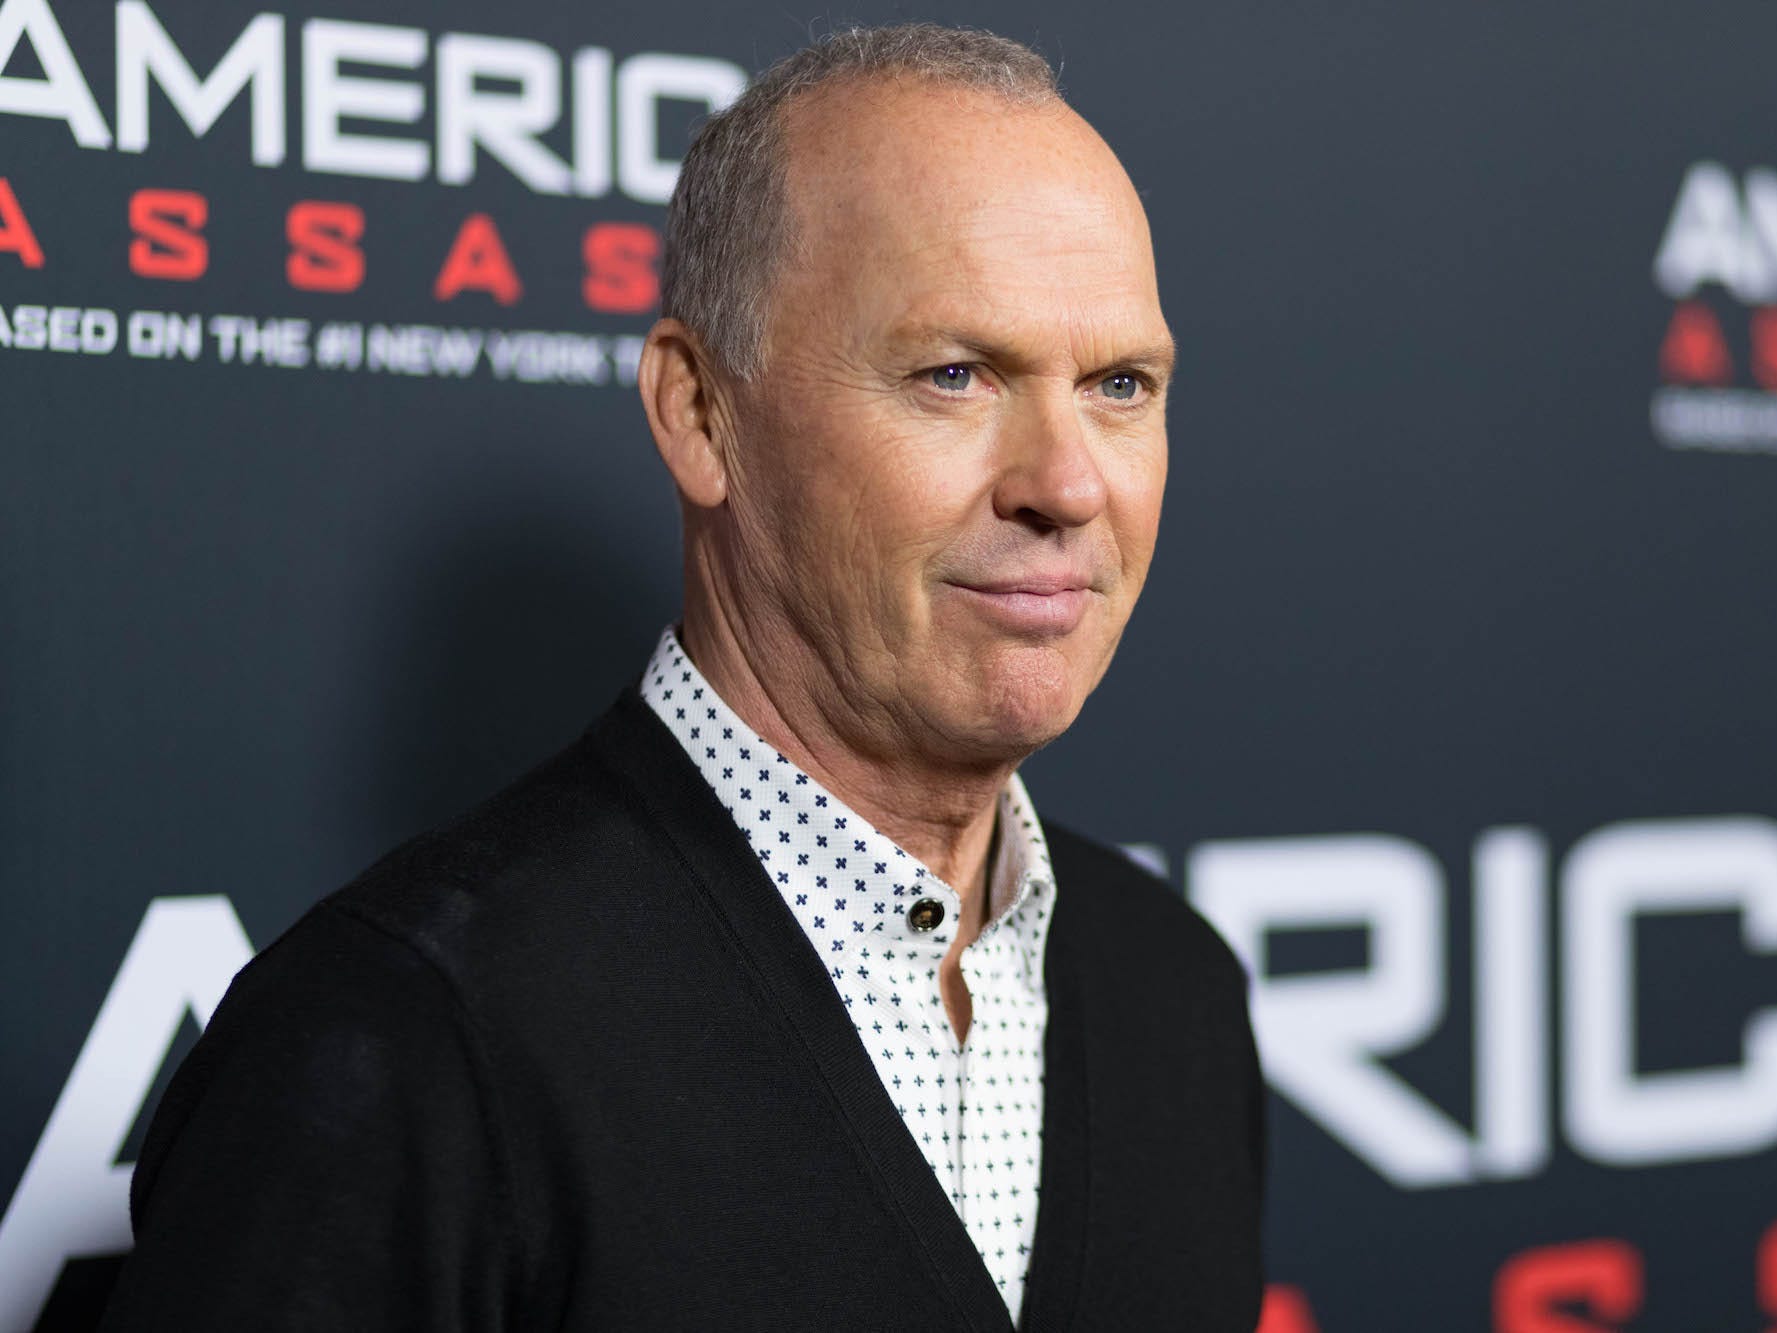 12 Michael Keaton movies that show off his acting chops, from most